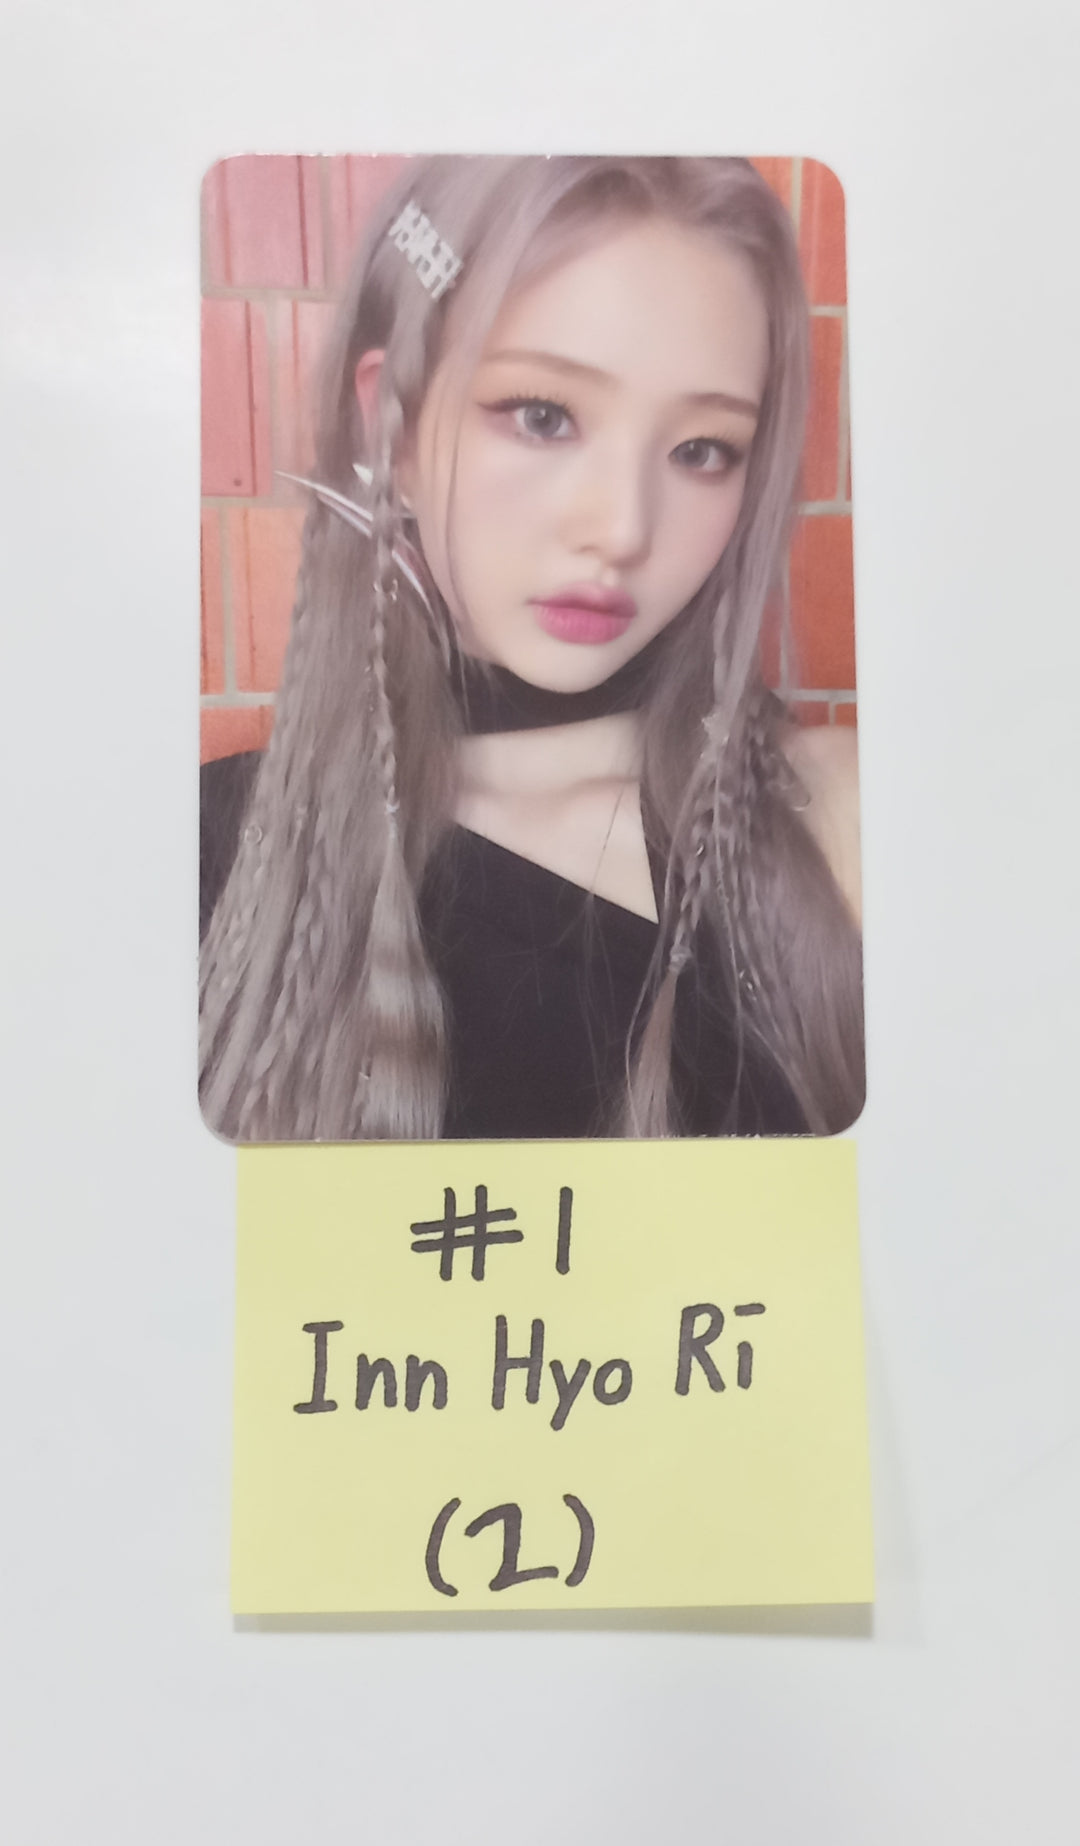 Mimiirose "LIVE" - Official Photocard [23.09.20]